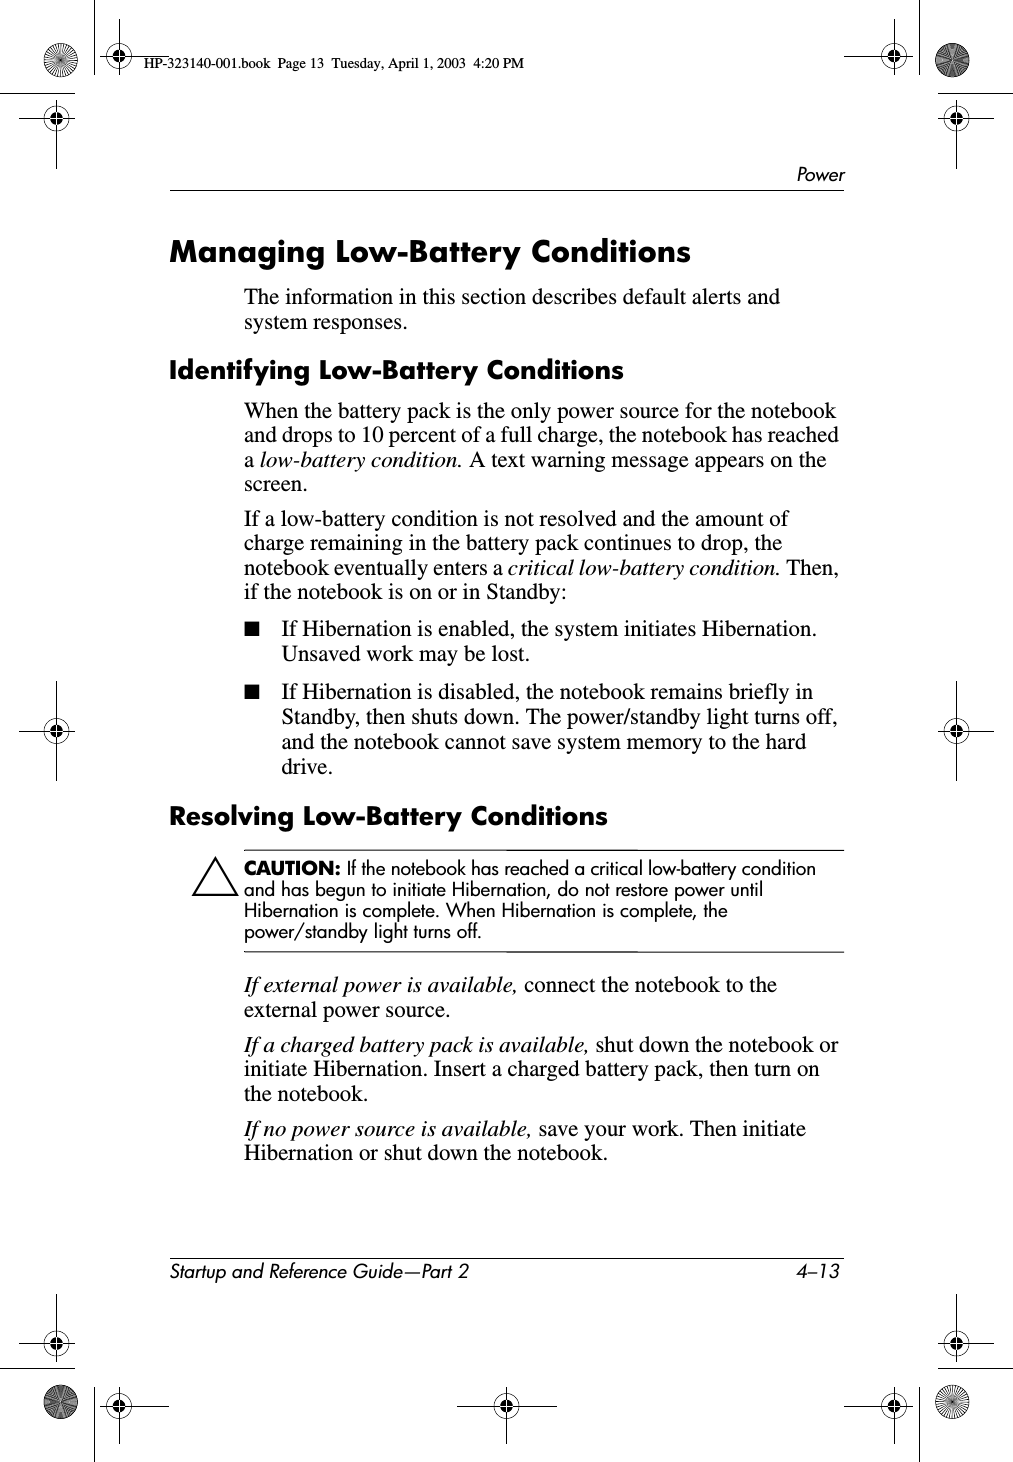 PowerStartup and Reference Guide—Part 2 4–13Managing Low-Battery ConditionsThe information in this section describes default alerts and system responses.Identifying Low-Battery ConditionsWhen the battery pack is the only power source for the notebook and drops to 10 percent of a full charge, the notebook has reached alow-battery condition. A text warning message appears on the screen.If a low-battery condition is not resolved and the amount of charge remaining in the battery pack continues to drop, the notebook eventually enters a critical low-battery condition. Then, if the notebook is on or in Standby:■If Hibernation is enabled, the system initiates Hibernation. Unsaved work may be lost.■If Hibernation is disabled, the notebook remains briefly in Standby, then shuts down. The power/standby light turns off, and the notebook cannot save system memory to the hard drive.Resolving Low-Battery ConditionsÄCAUTION: If the notebook has reached a critical low-battery condition and has begun to initiate Hibernation, do not restore power until Hibernation is complete. When Hibernation is complete, the power/standby light turns off.If external power is available, connect the notebook to the external power source.If a charged battery pack is available, shut down the notebook or initiate Hibernation. Insert a charged battery pack, then turn on the notebook.If no power source is available, save your work. Then initiate Hibernation or shut down the notebook.HP-323140-001.book  Page 13  Tuesday, April 1, 2003  4:20 PM